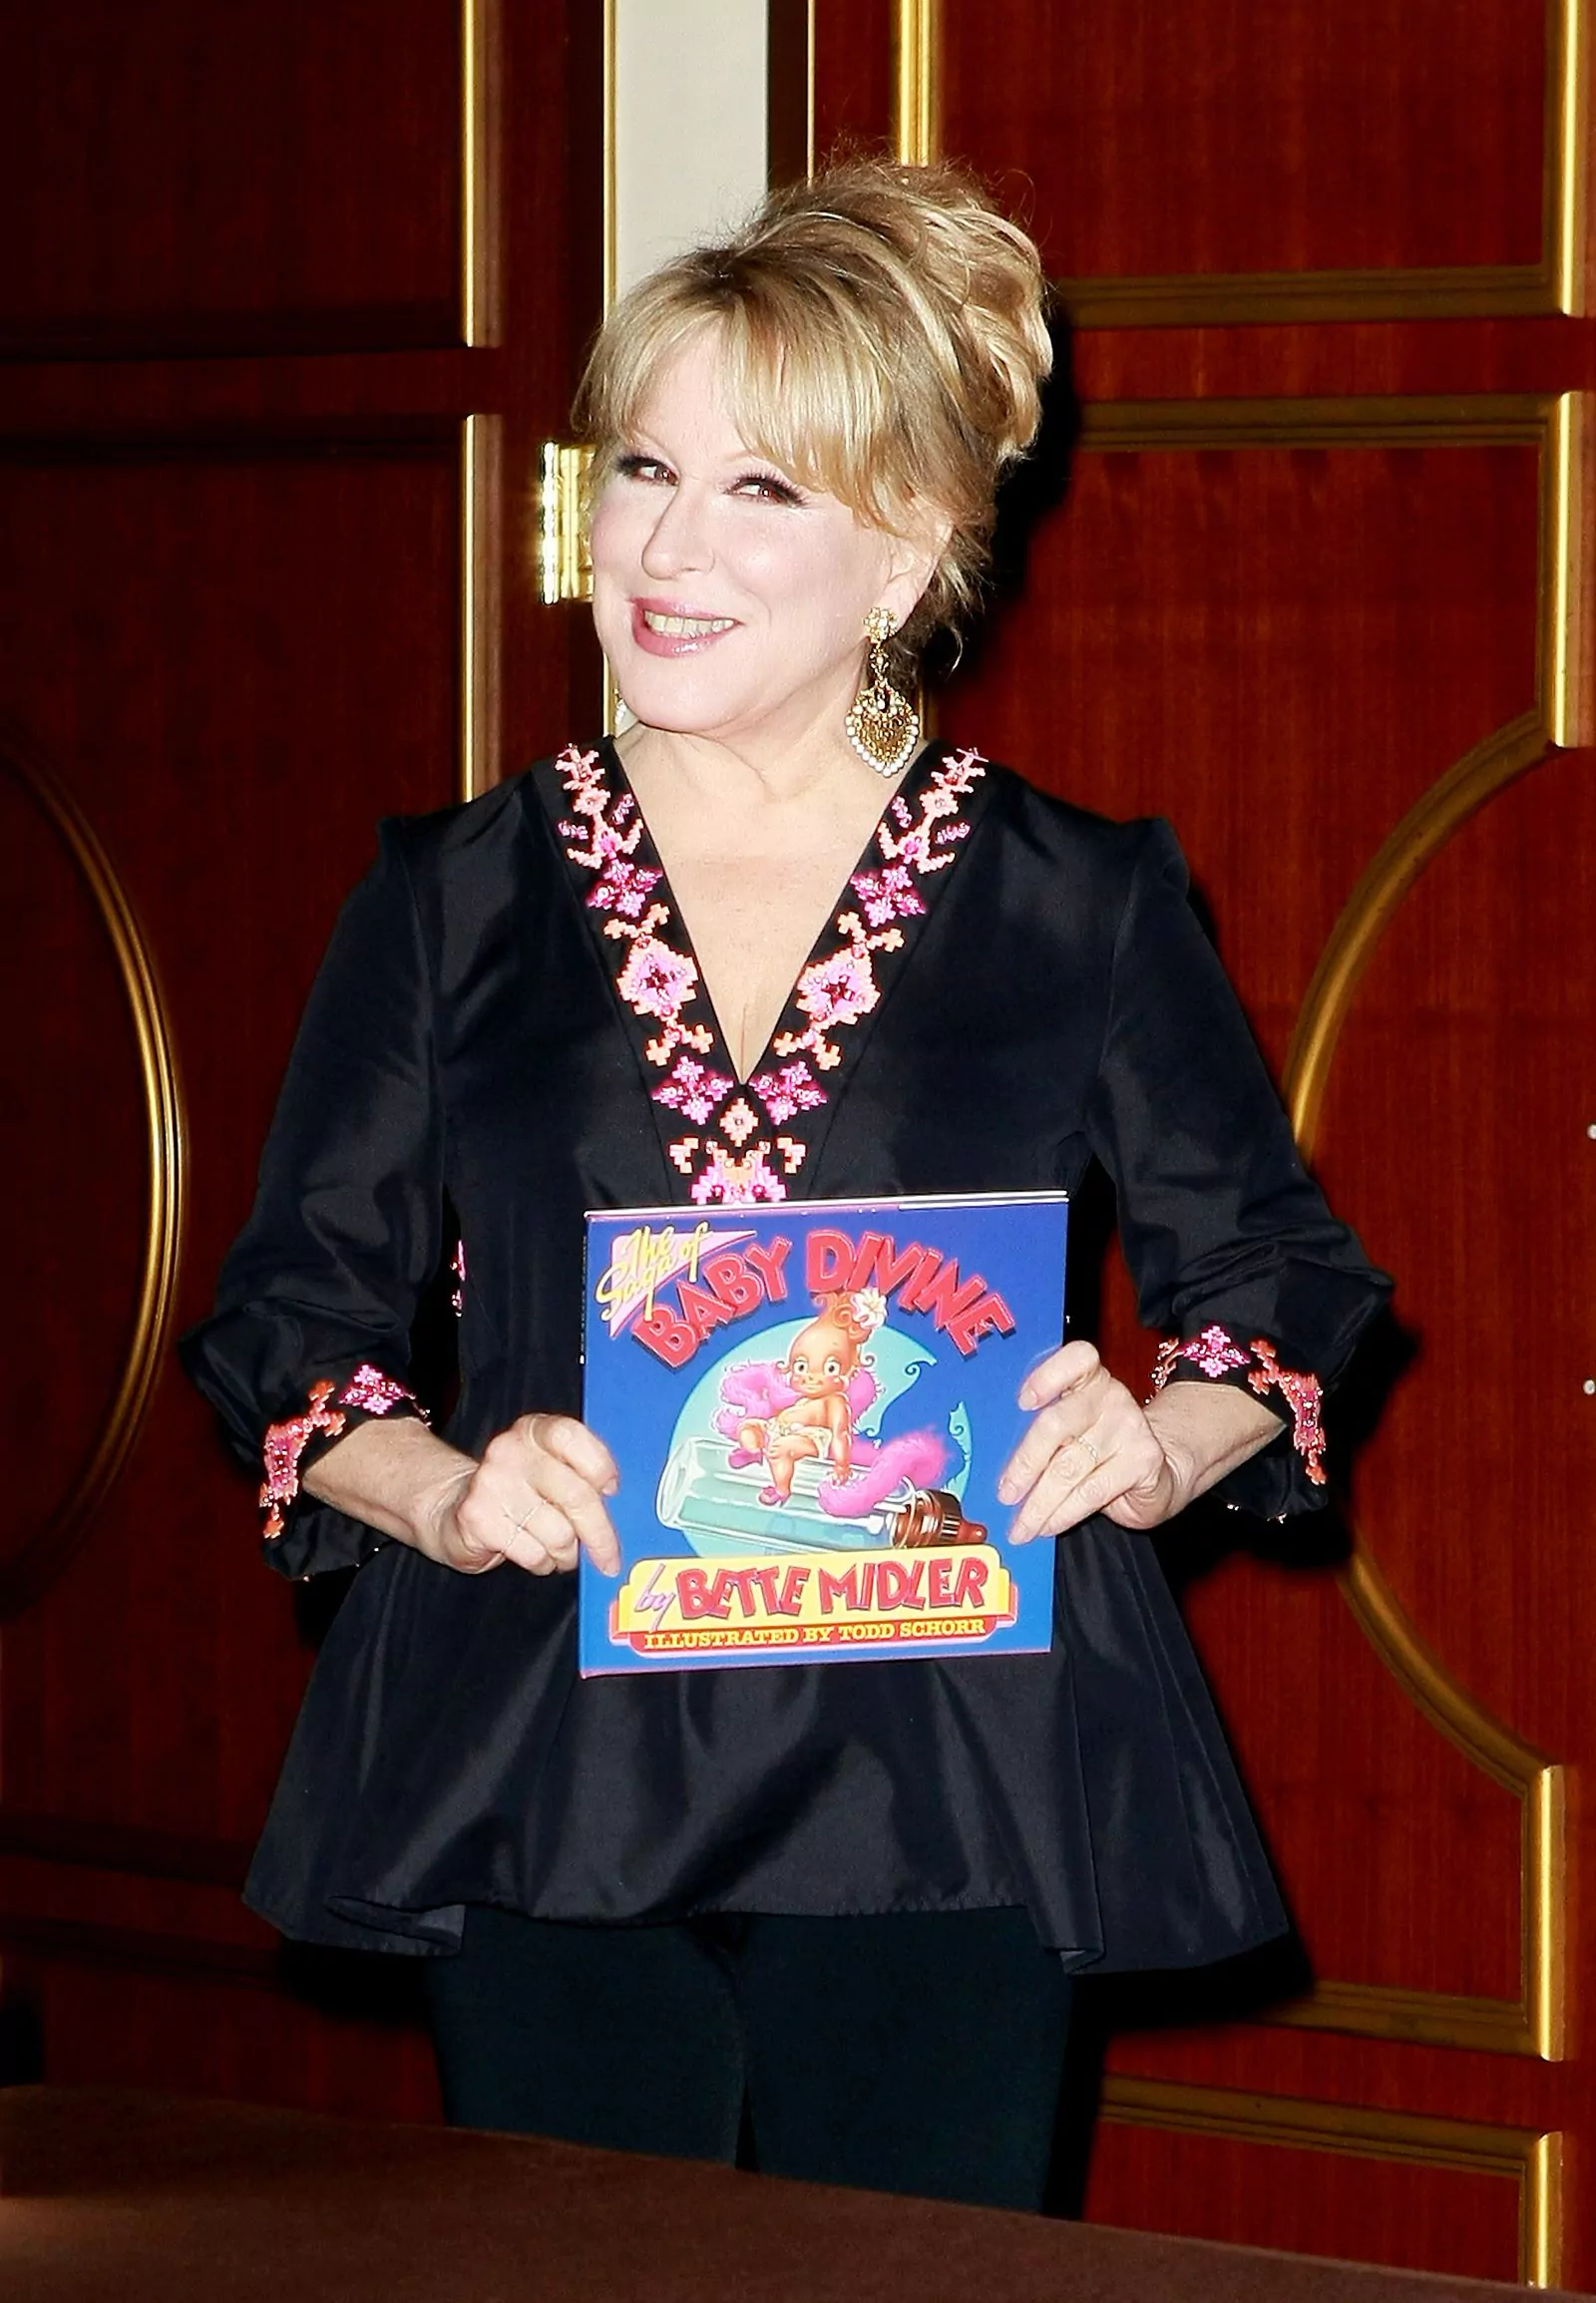 Bette Midler signs copies of her book "The Saga of Baby Divine" in Las Vegas on January 6, 2010.